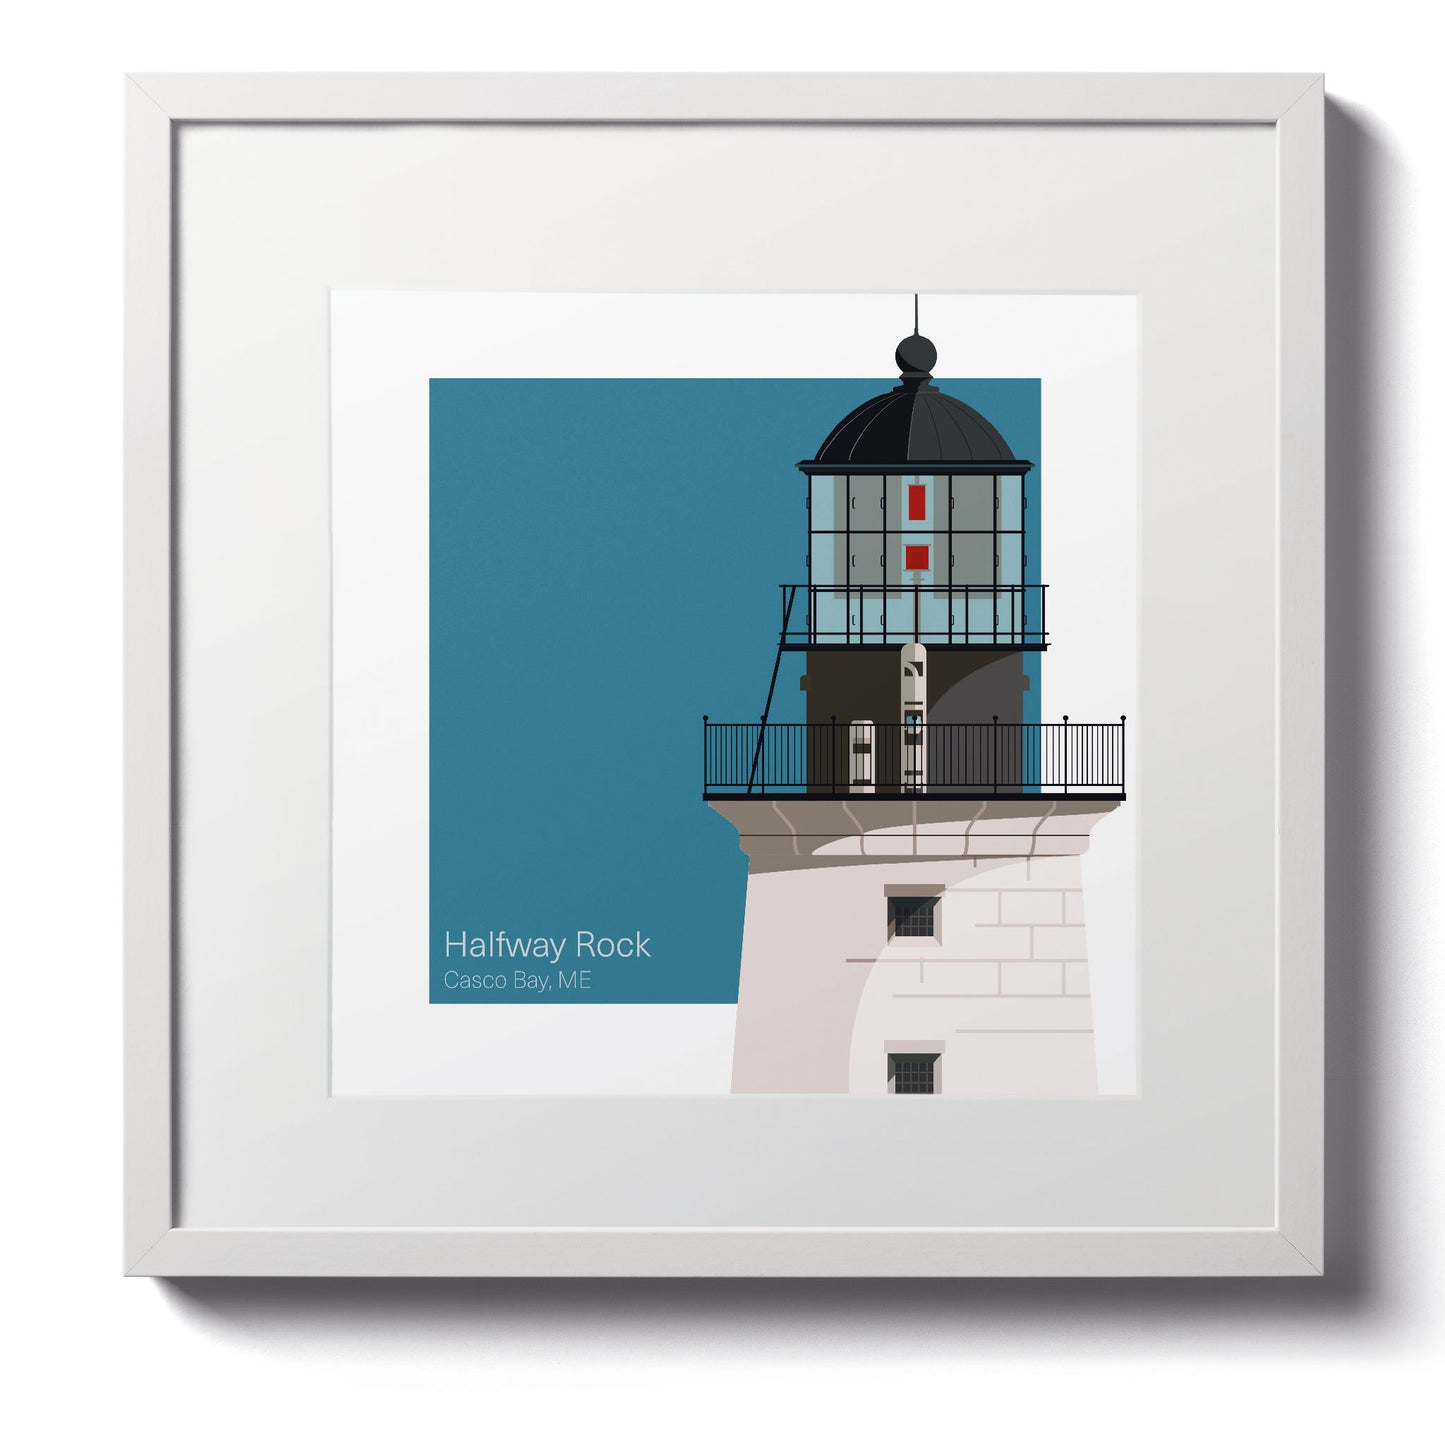 Illustration of the Halfway Rock lighthouse, ME, USA. On a white background with aqua blue square as a backdrop., in a white frame  and measuring 12"x12" (30x30cm).